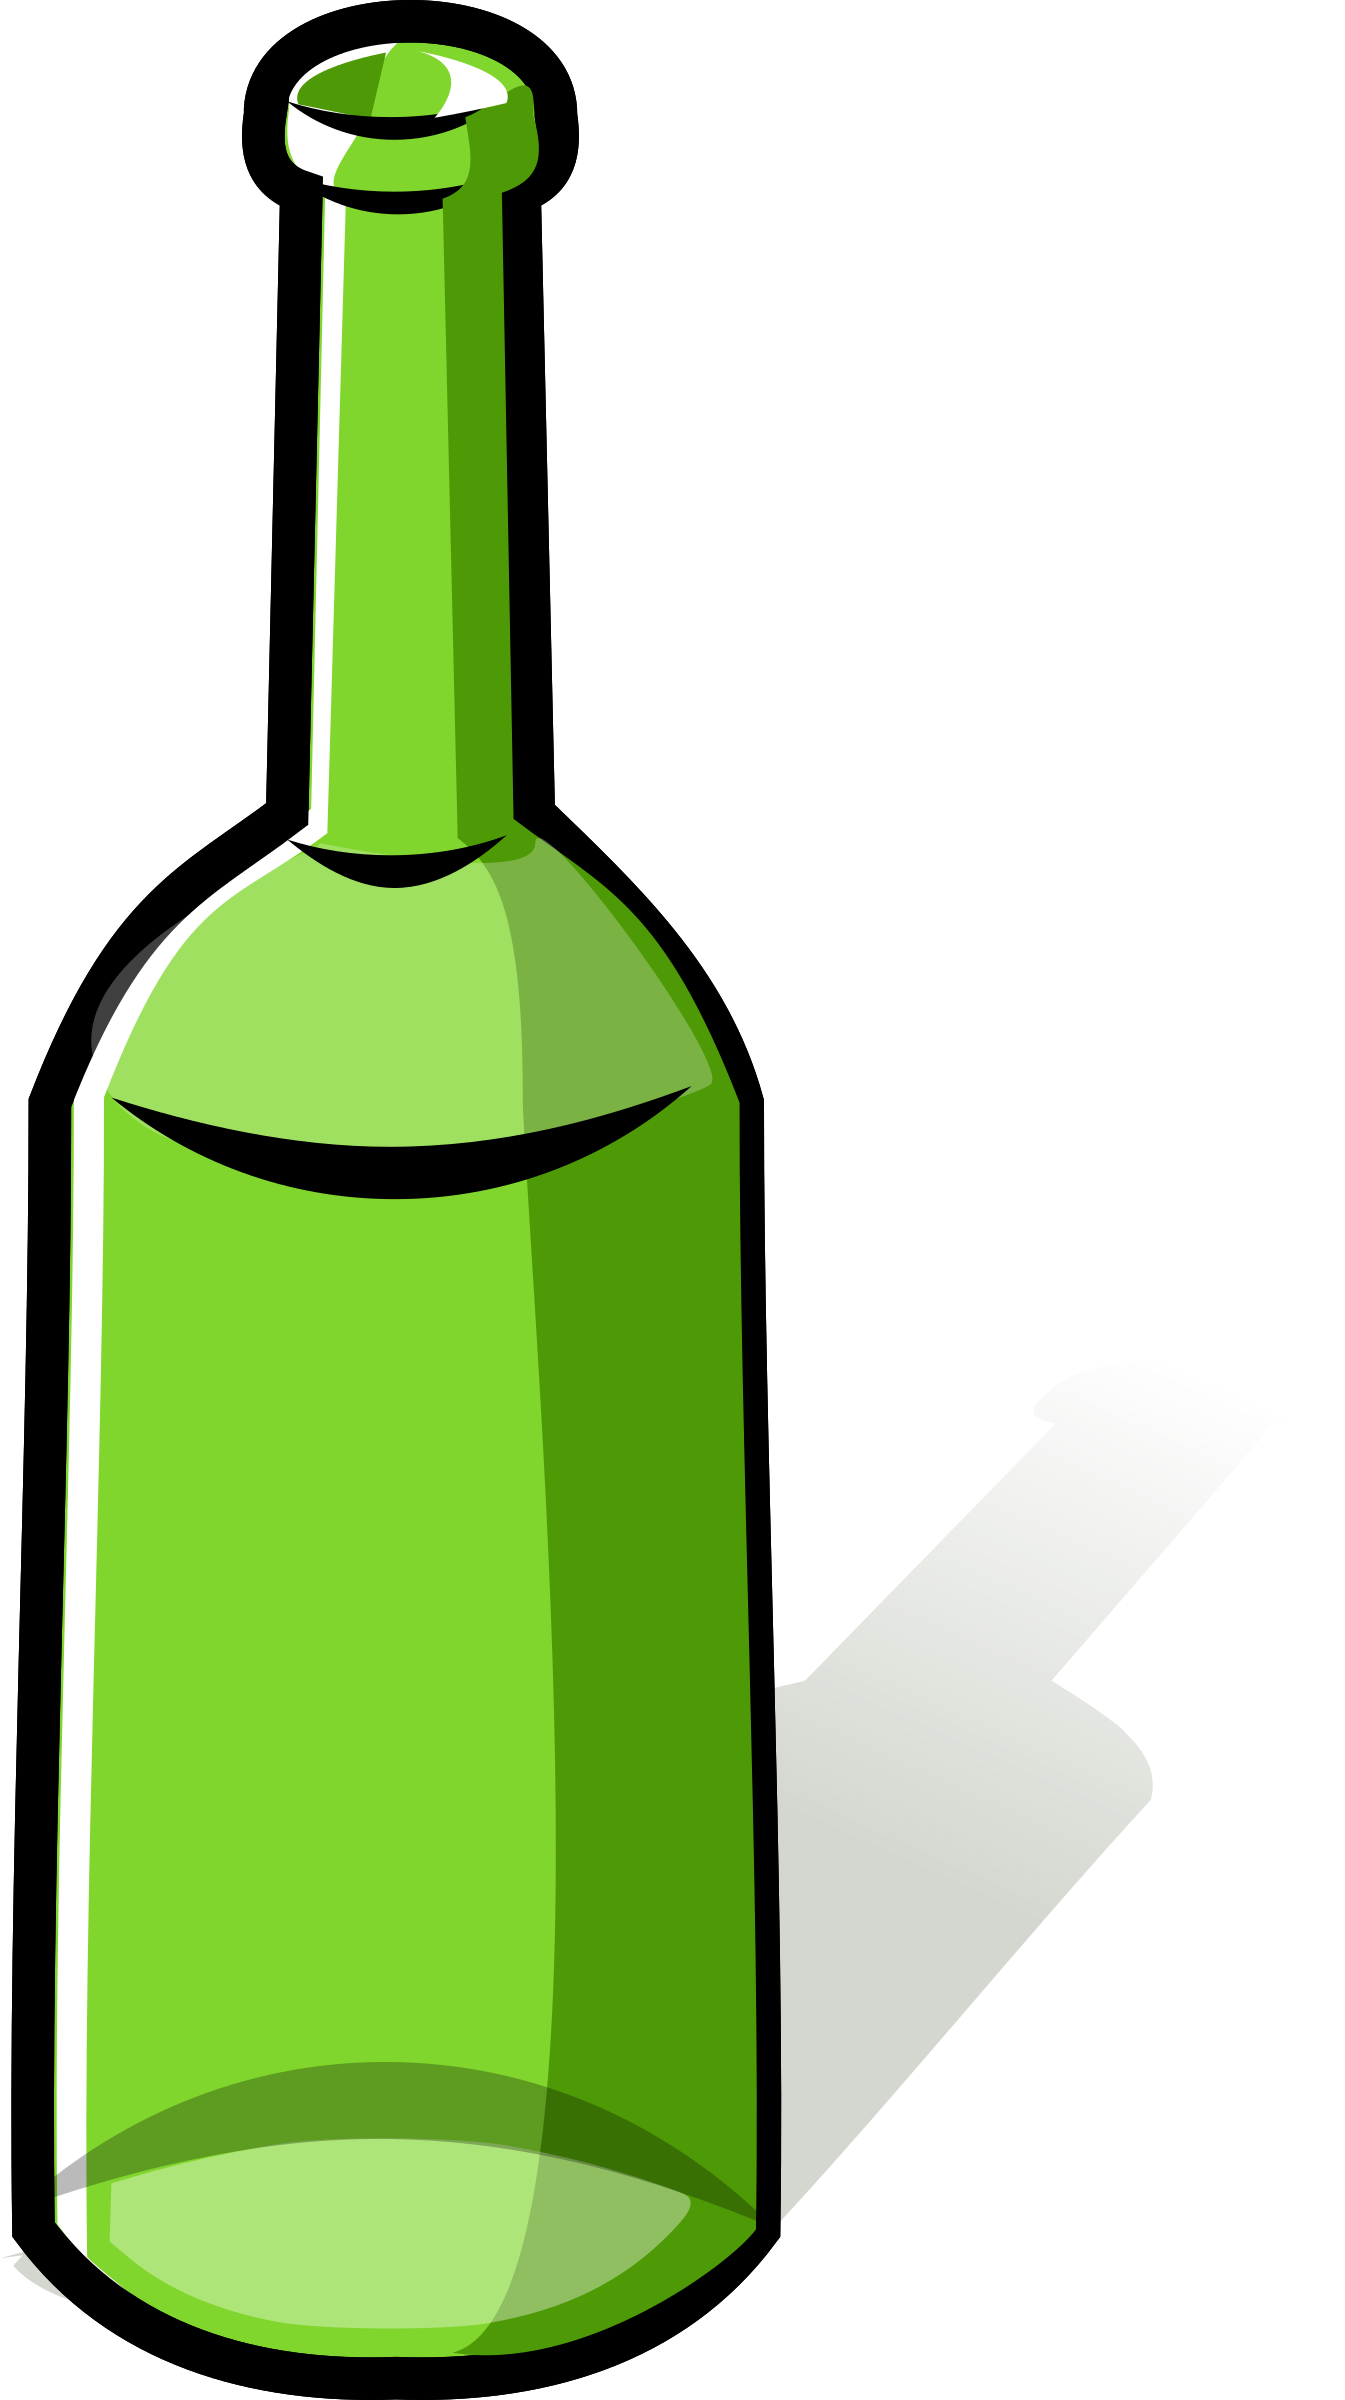 Download animated bottle clipart 10 free Cliparts | Download images ...